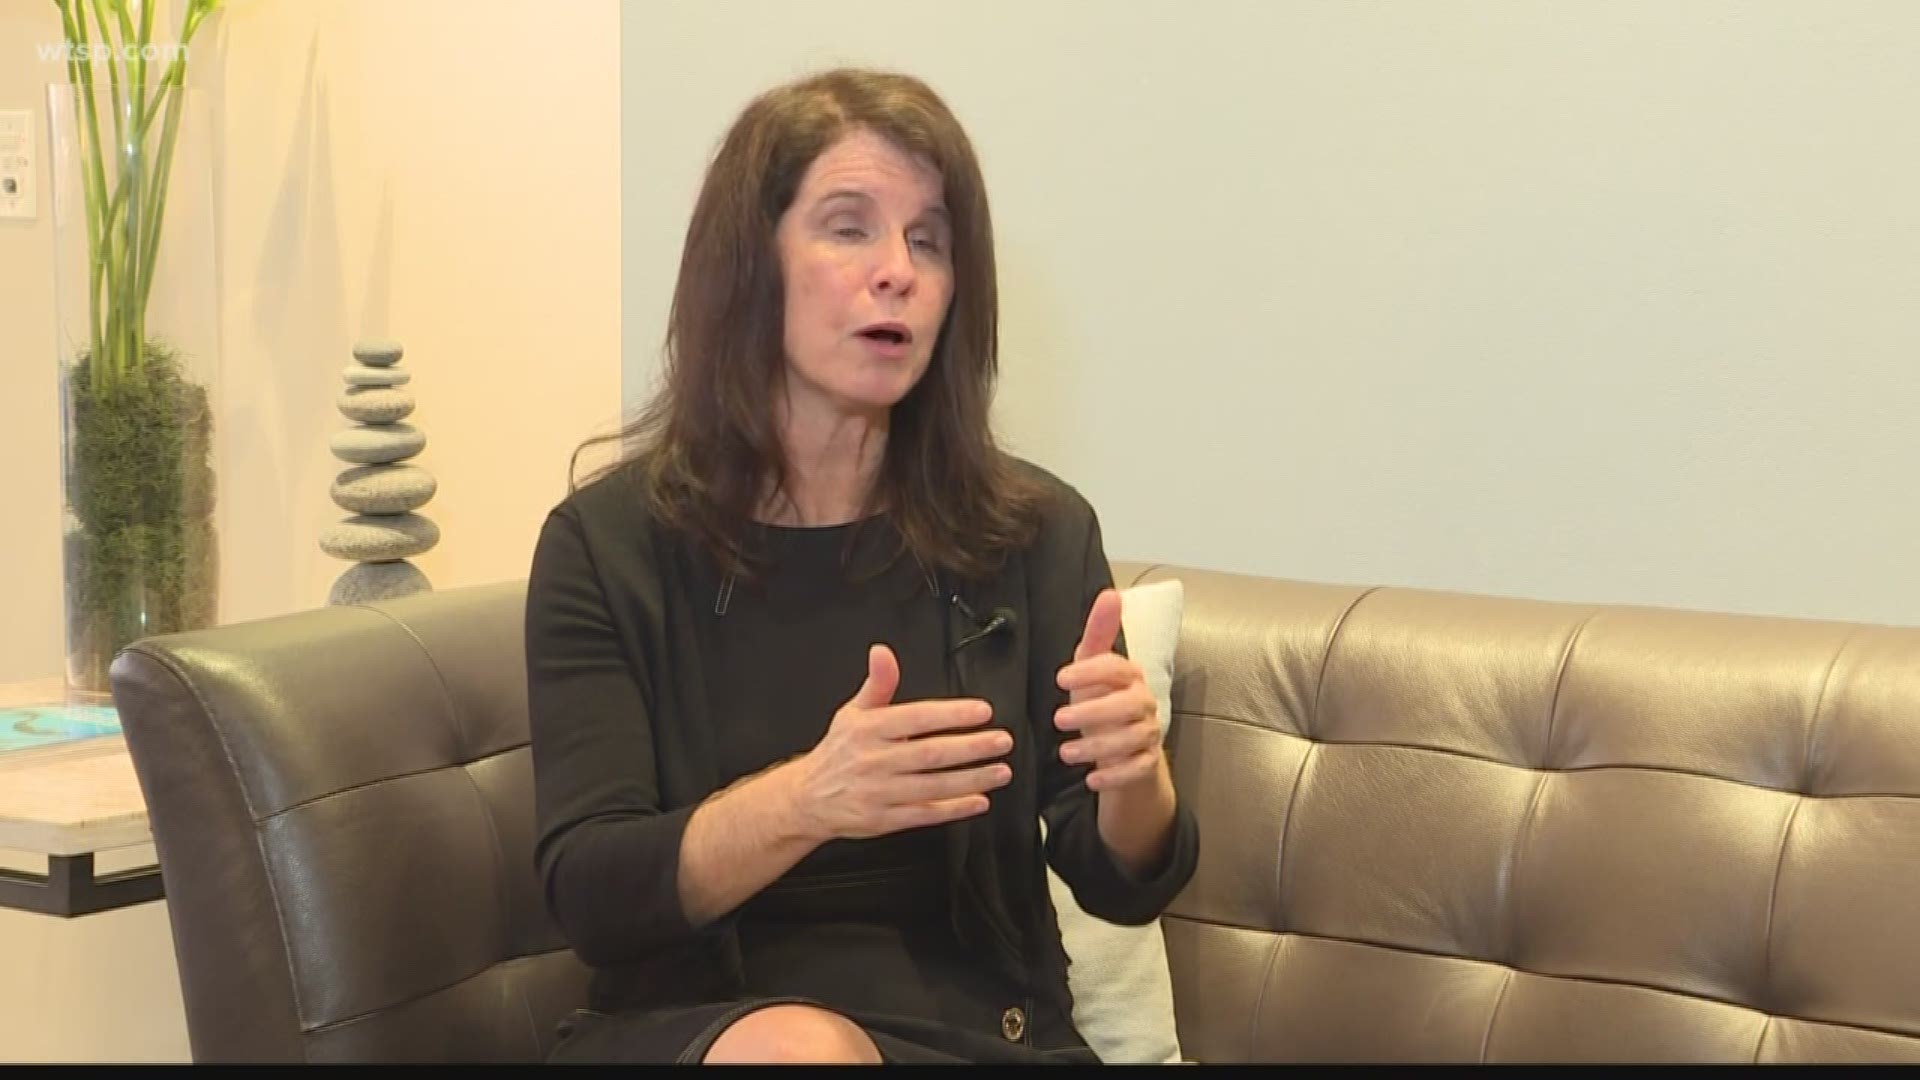 The head of the state's Agency for Health Care Administration sat down with 10Investigates.